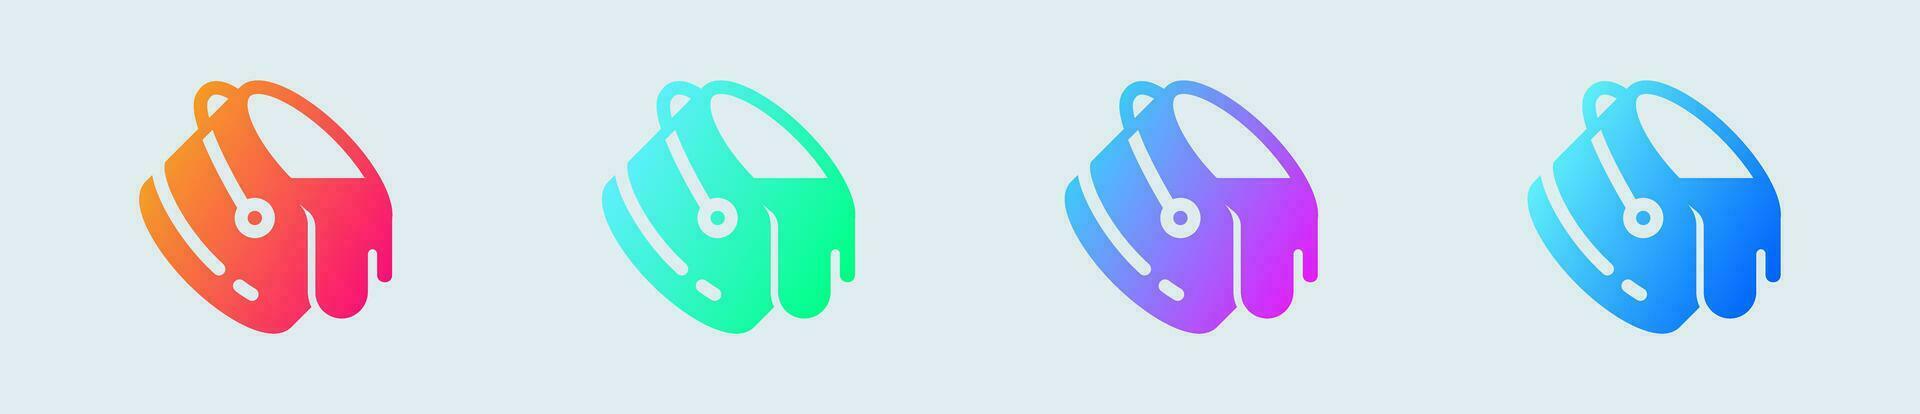 Paint bucket solid icon in gradient colors. Colors signs vector illustration.